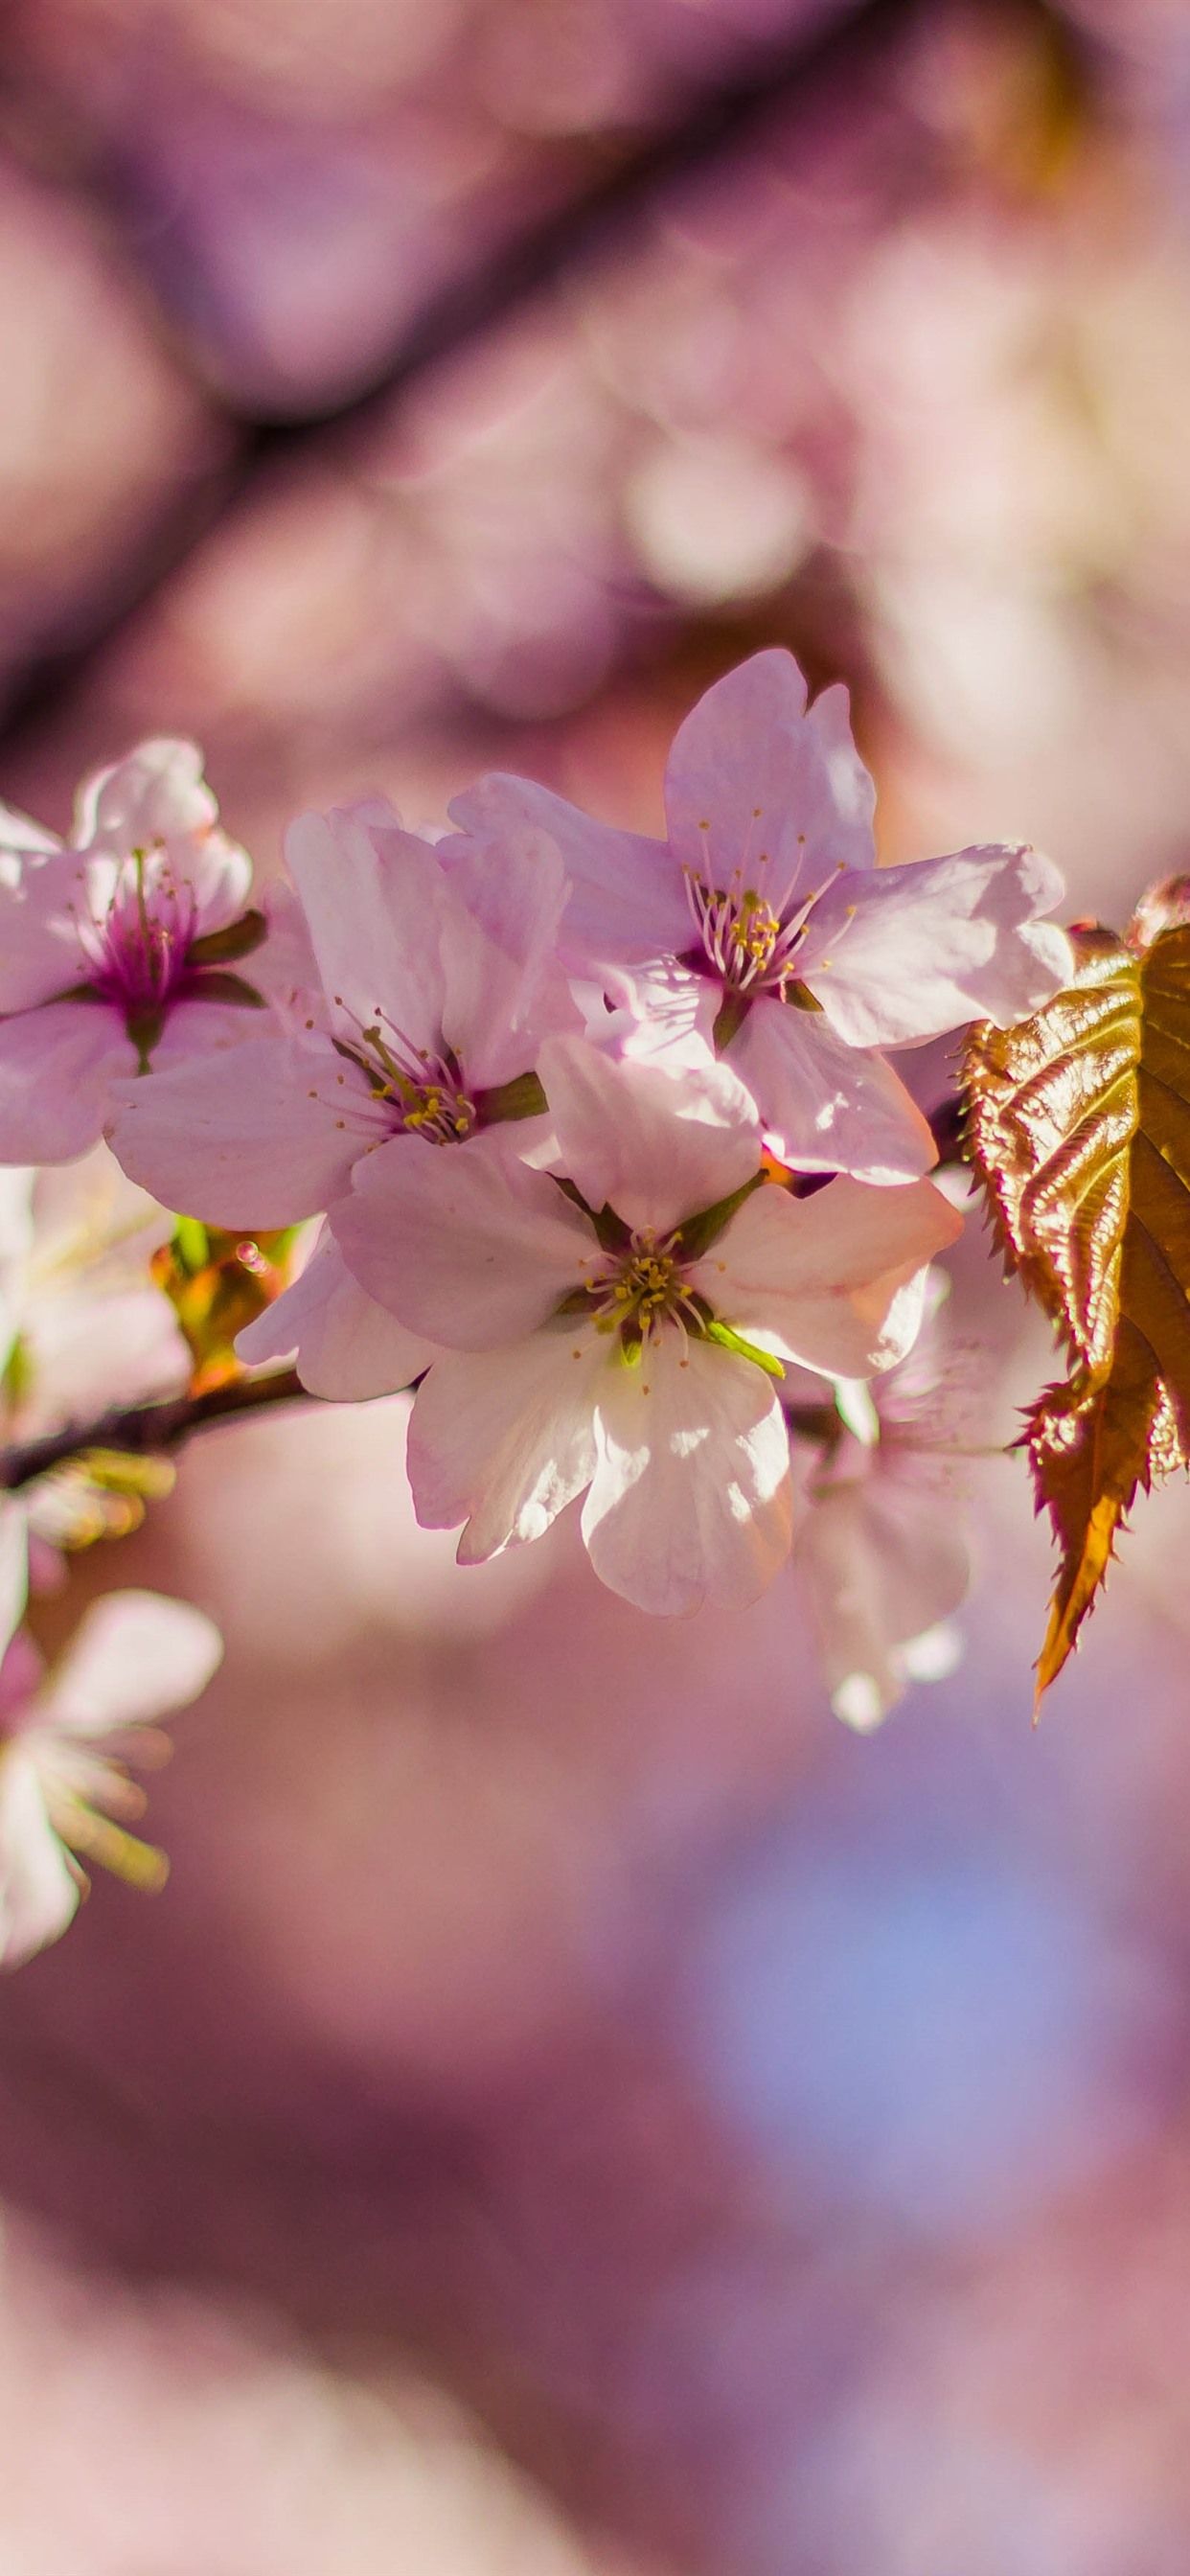 Sakura, Bloom, Spring, Leaves 1242x2688 IPhone 11 Pro XS Max Wallpaper, Background, Picture, Image